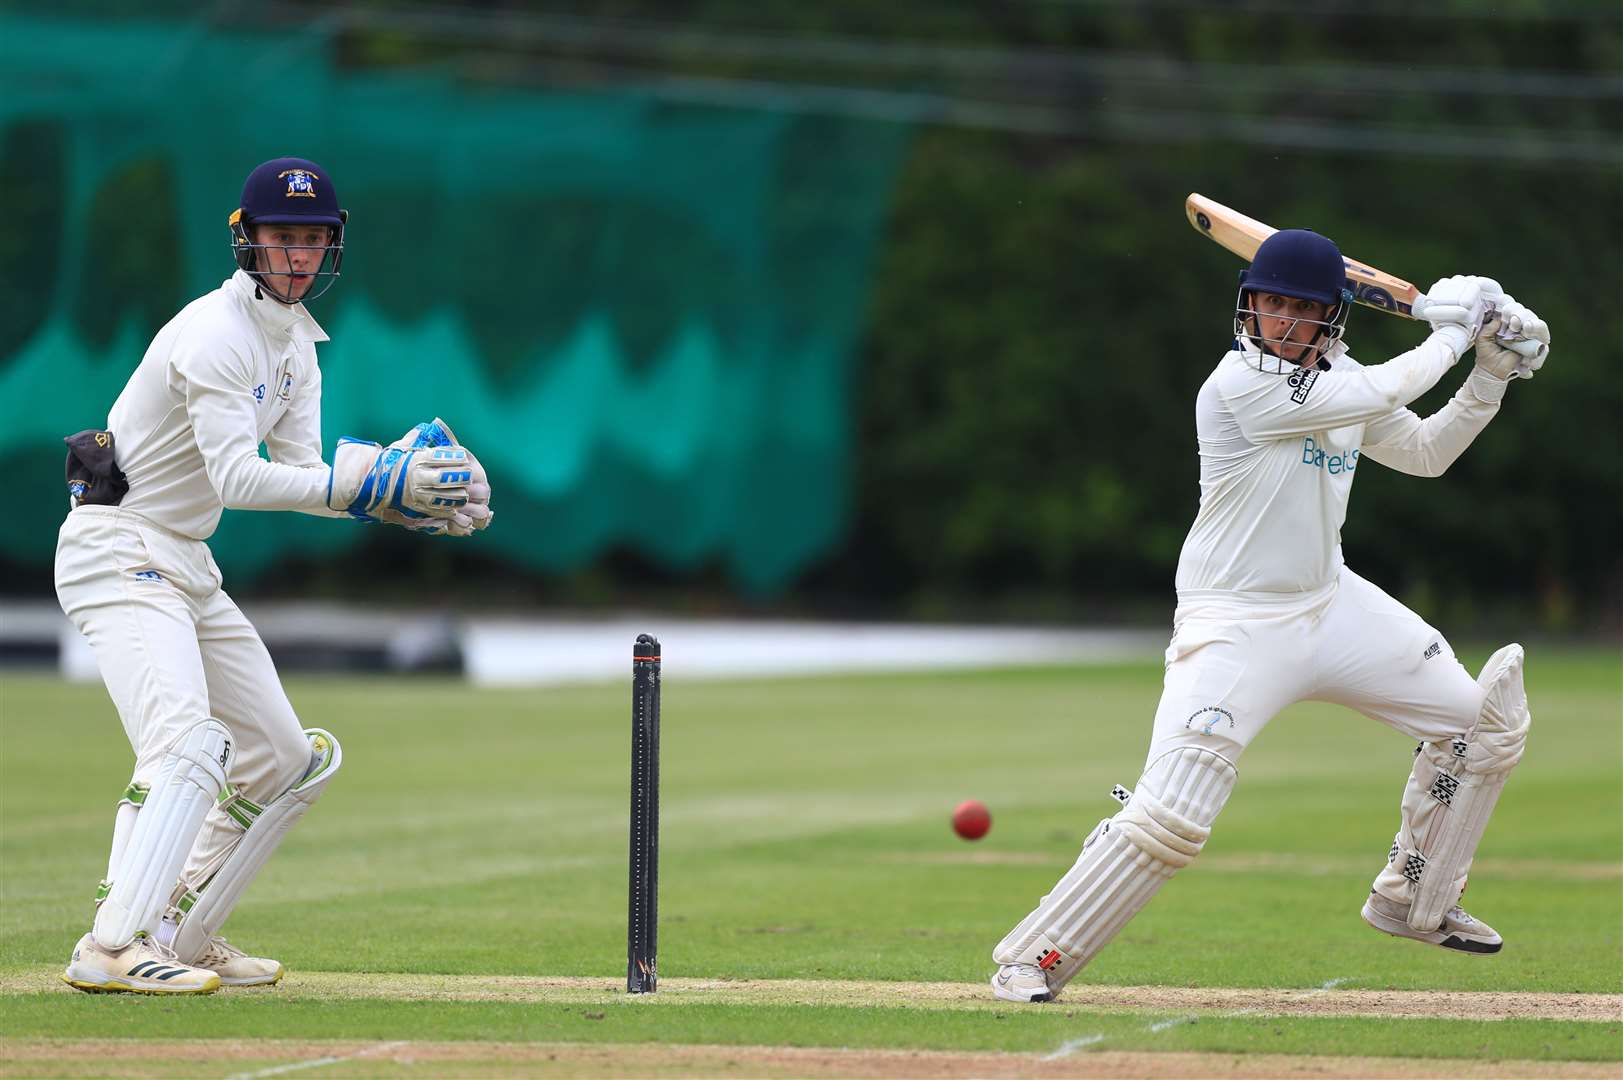 St Lawrence & Highland Court captain Matt Hammond cuts towards point at Polo Farm ahead of Canterbury wicketkeeper Liam Durrant. Picture: Gary Restall